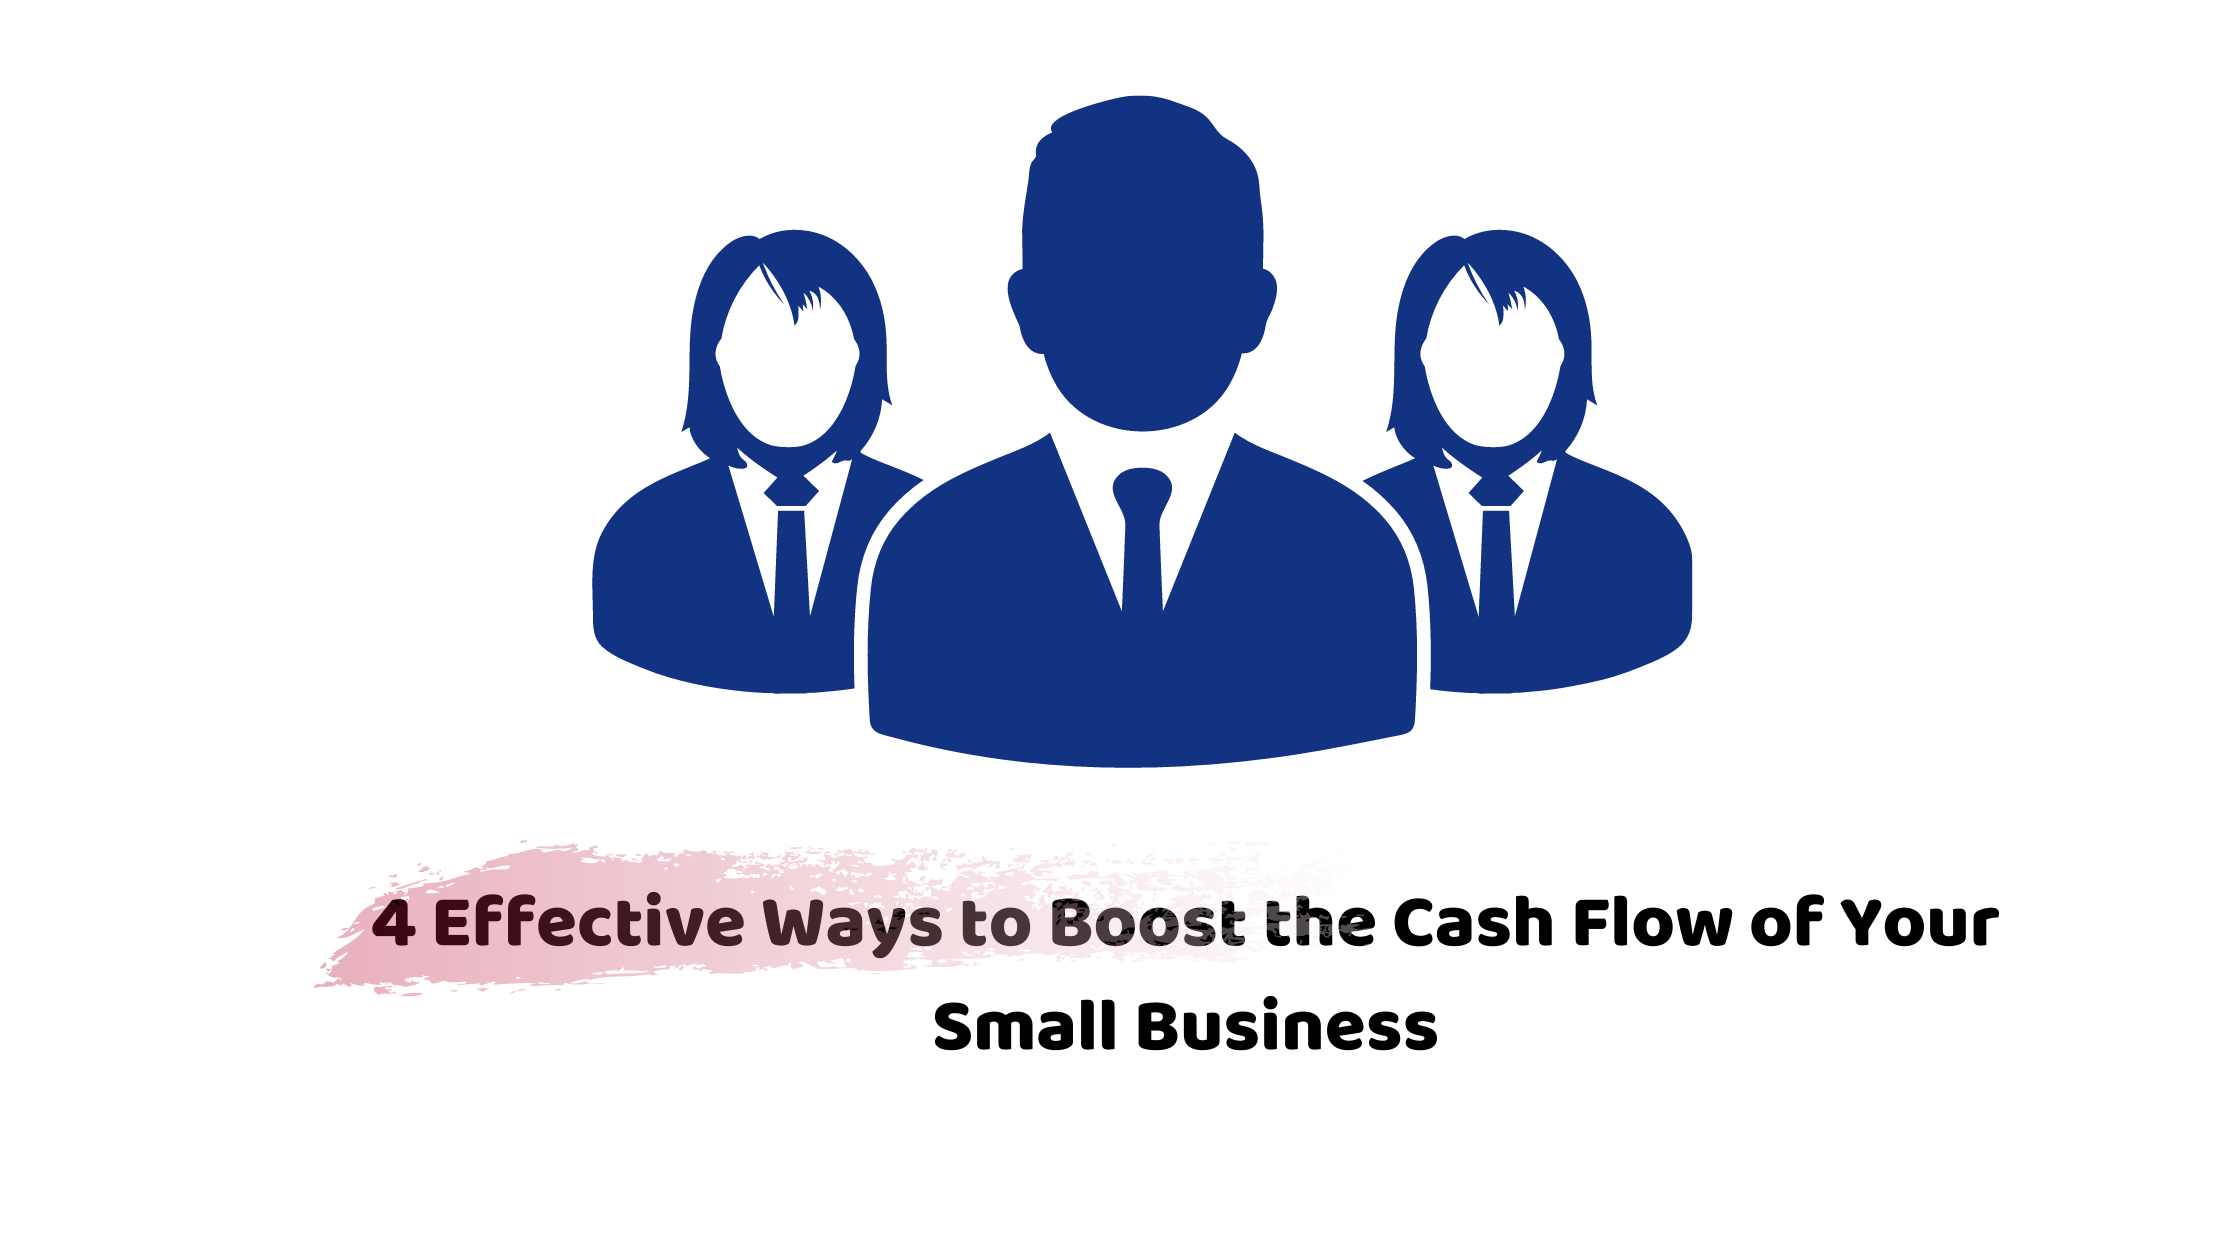 Cash Flow of Your Small Business